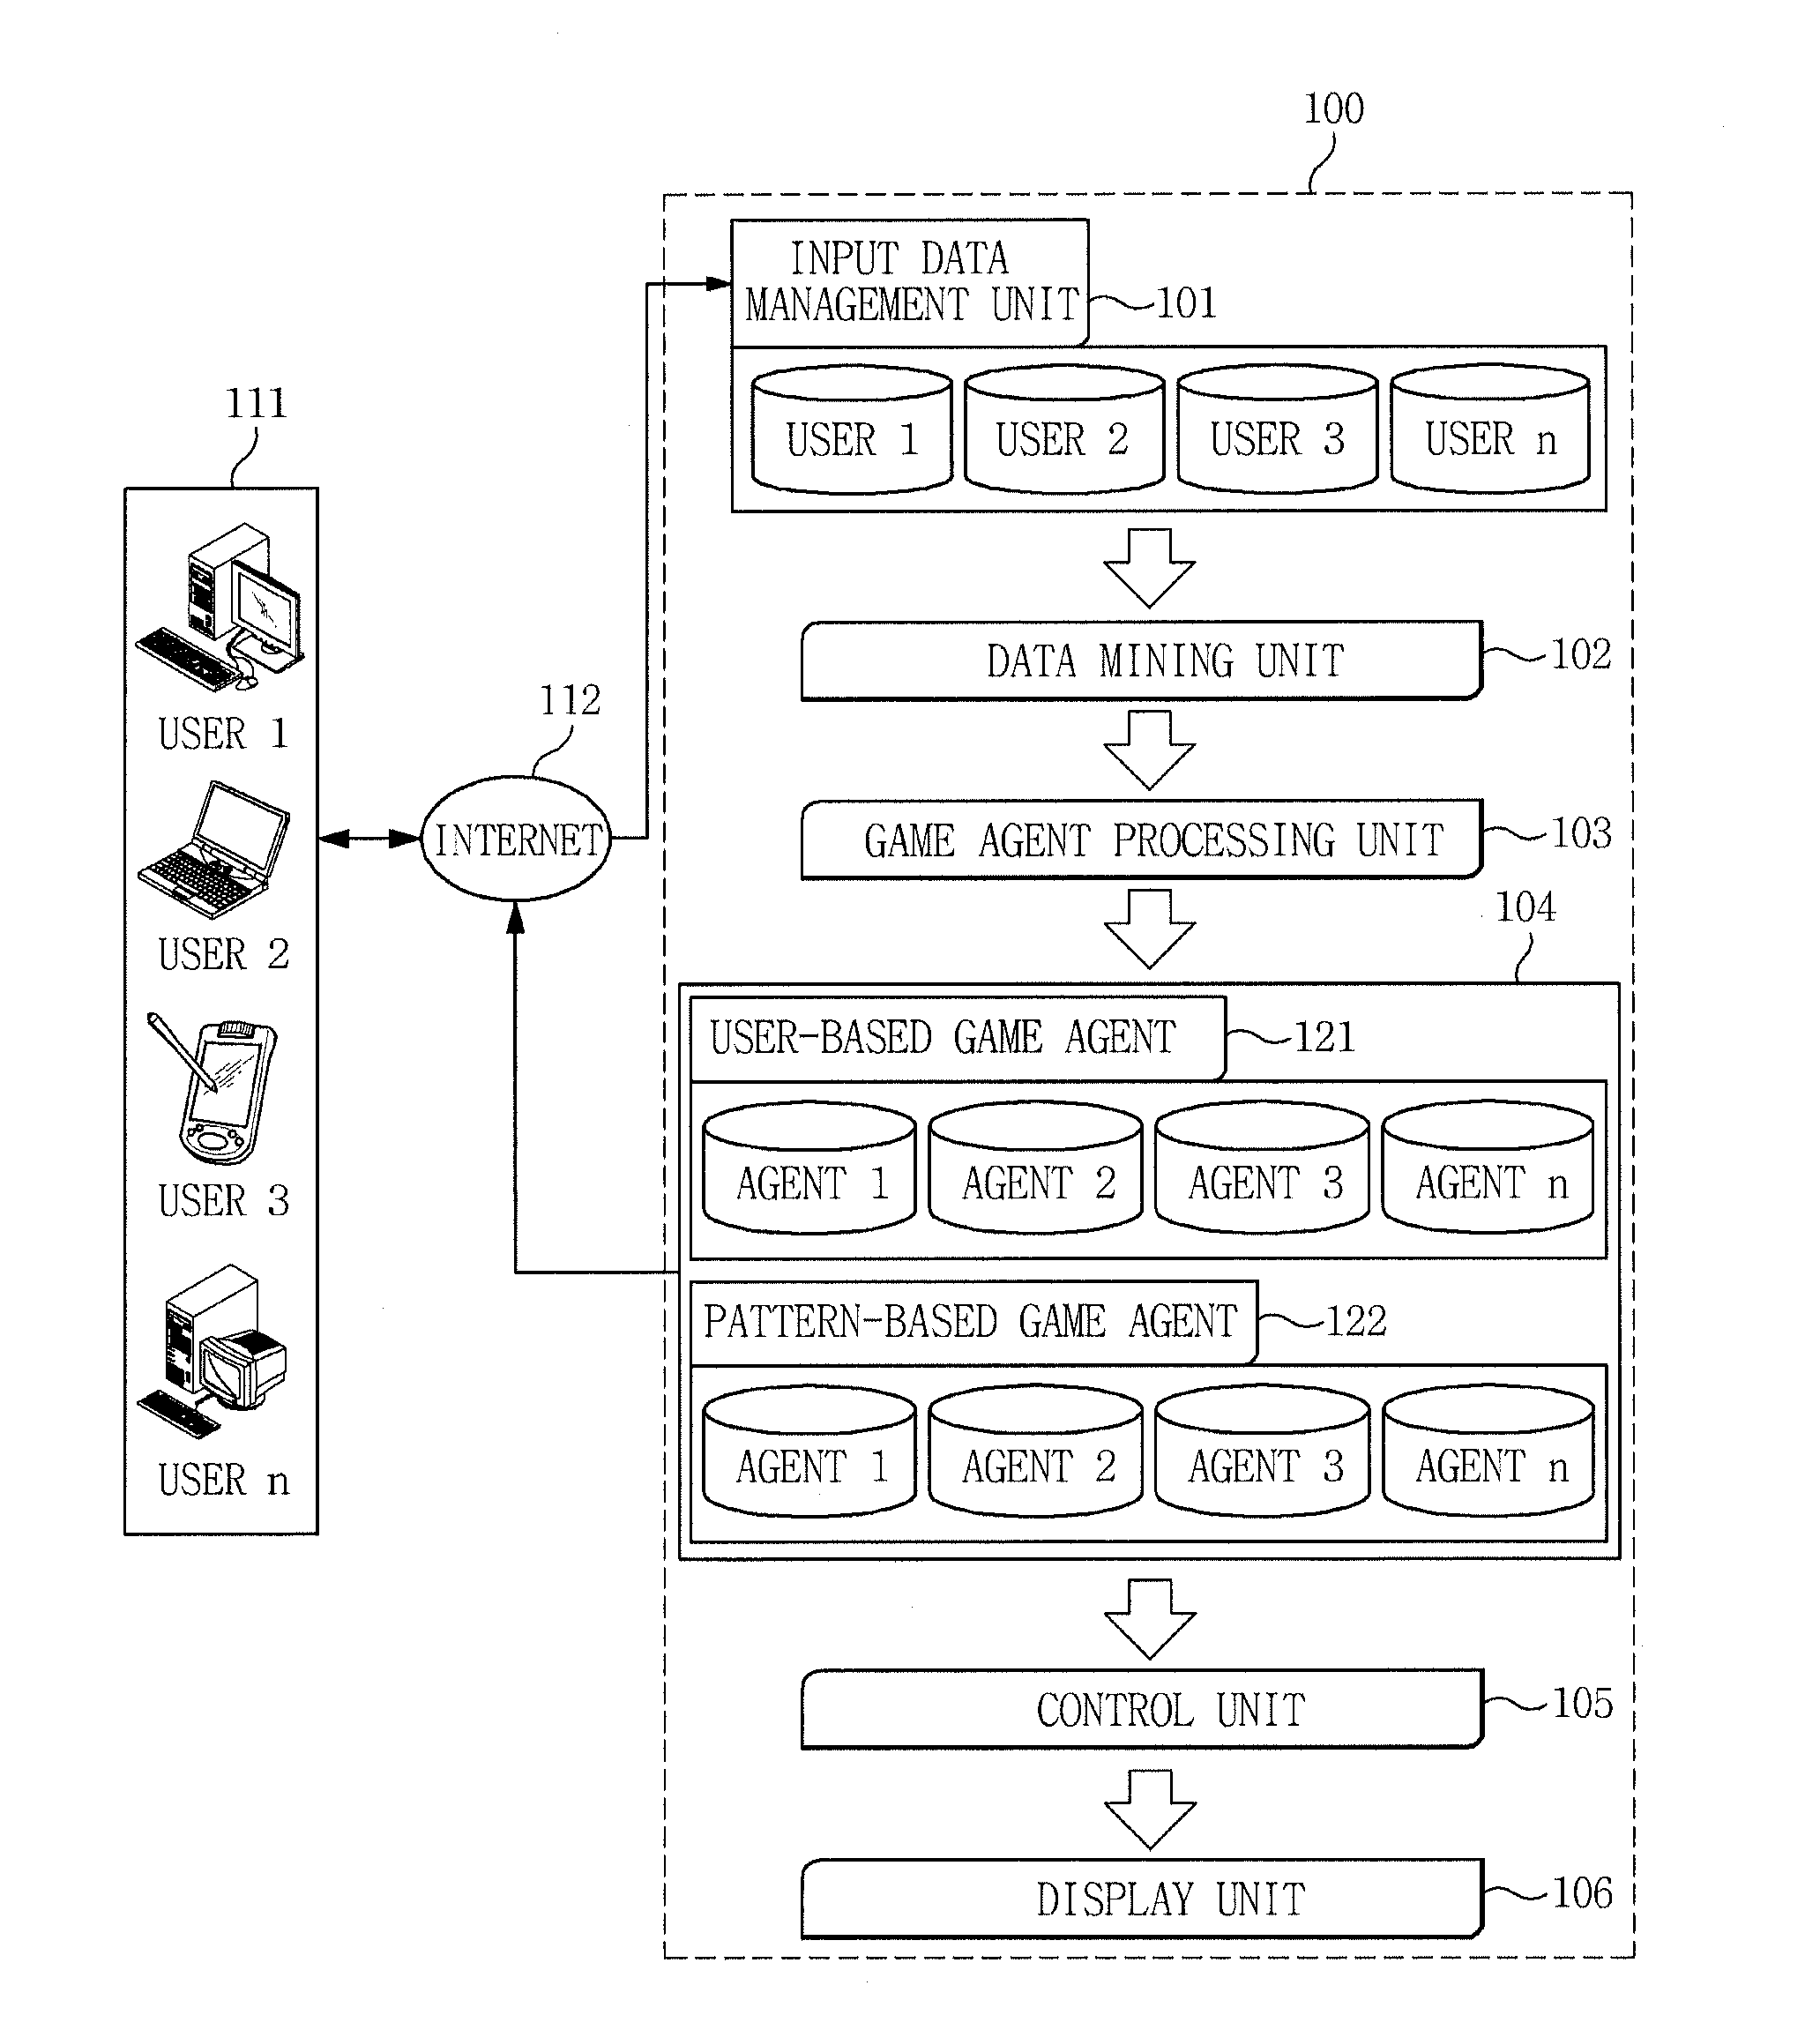 Apparatus and method for providing agent-based game service